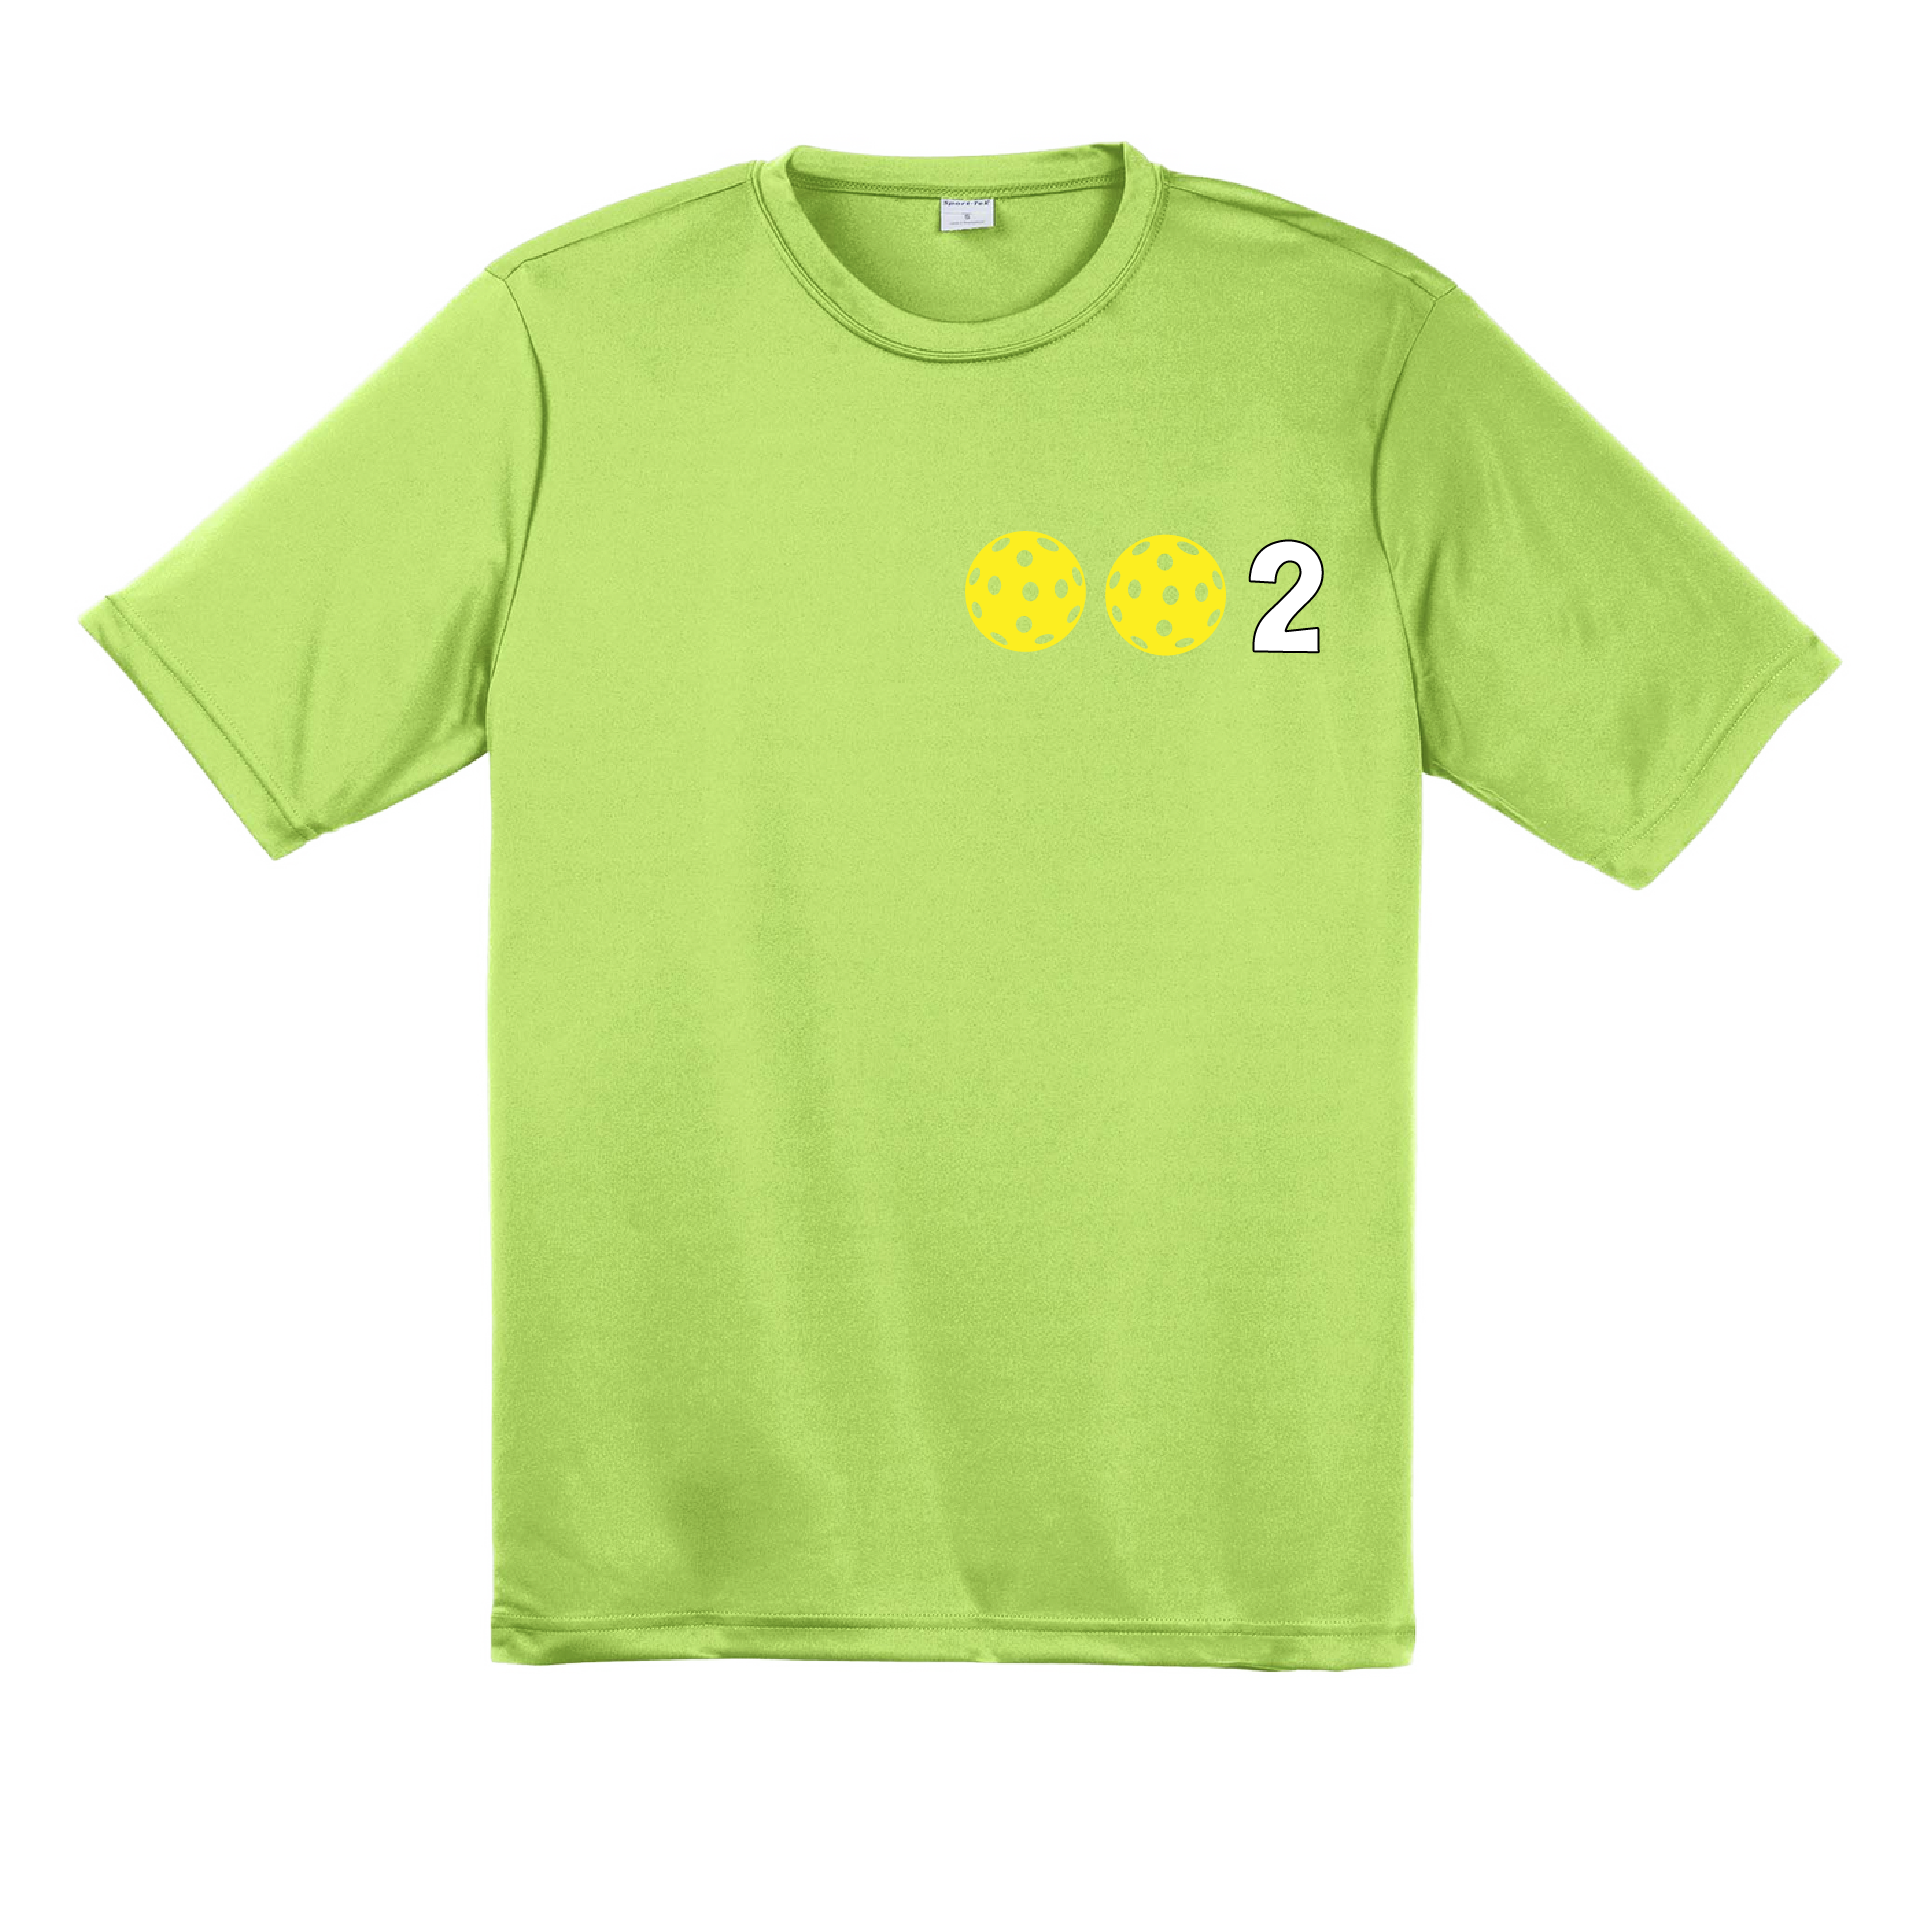 Design: 002 Pickleballs customizable color (Yellow, White, Cyan)  Men's Styles: Short Sleeve  Shirts are lightweight, roomy and highly breathable. These moisture-wicking shirts are designed for athletic performance. They feature PosiCharge technology to lock in color and prevent logos from fading. Removable tag and set-in sleeves for comfort